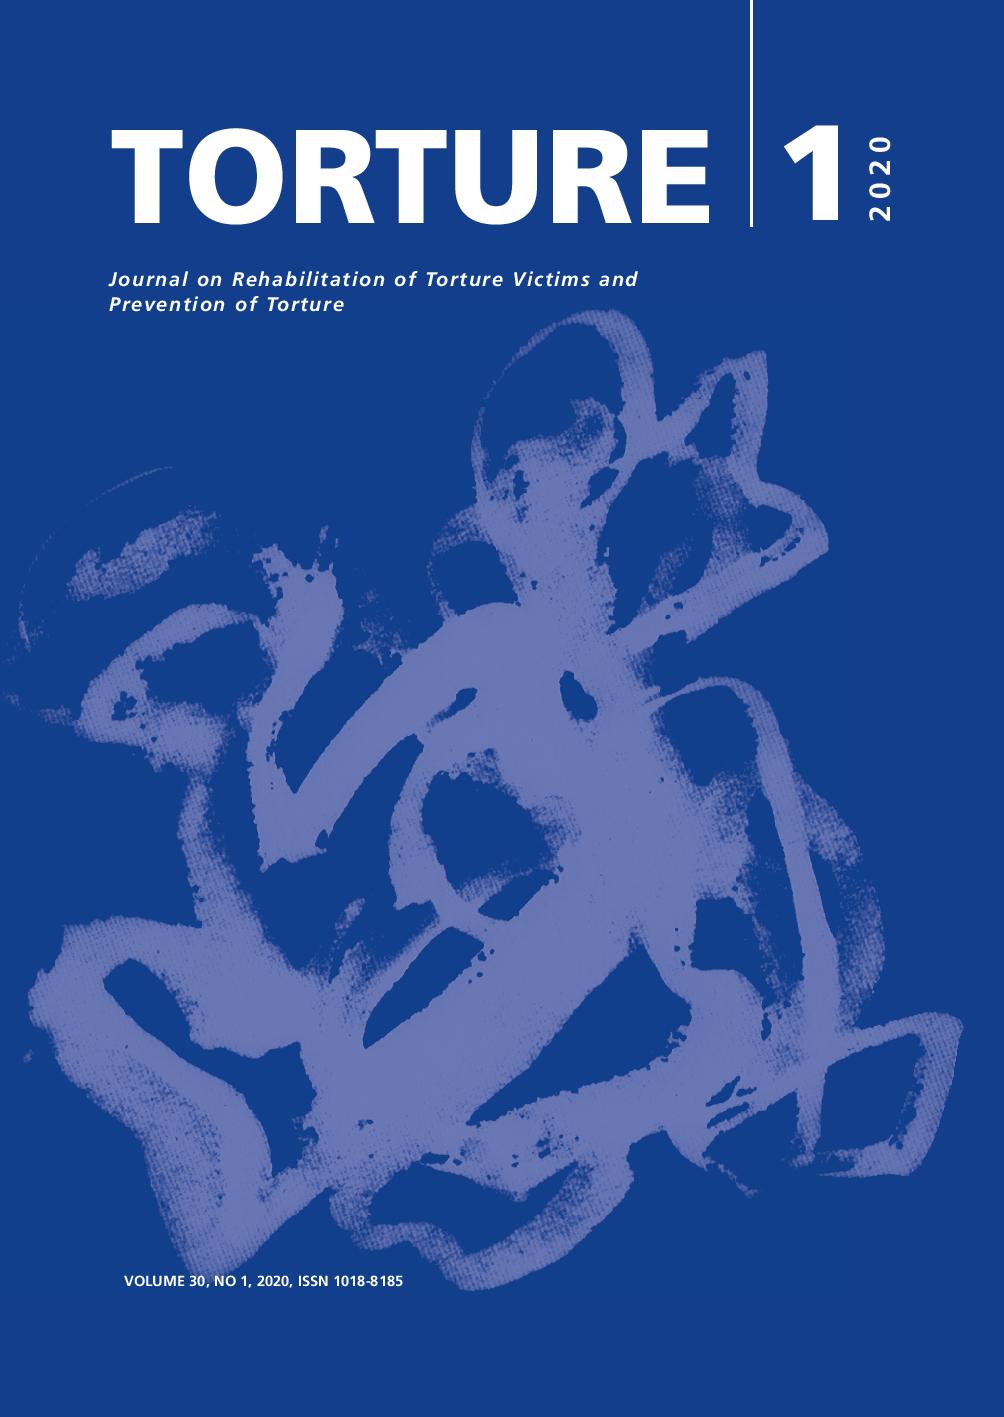 					View Vol. 30 No. 1 (2020): Journal on Rehabilitation of Torture Victims and Prevention of Torture
				